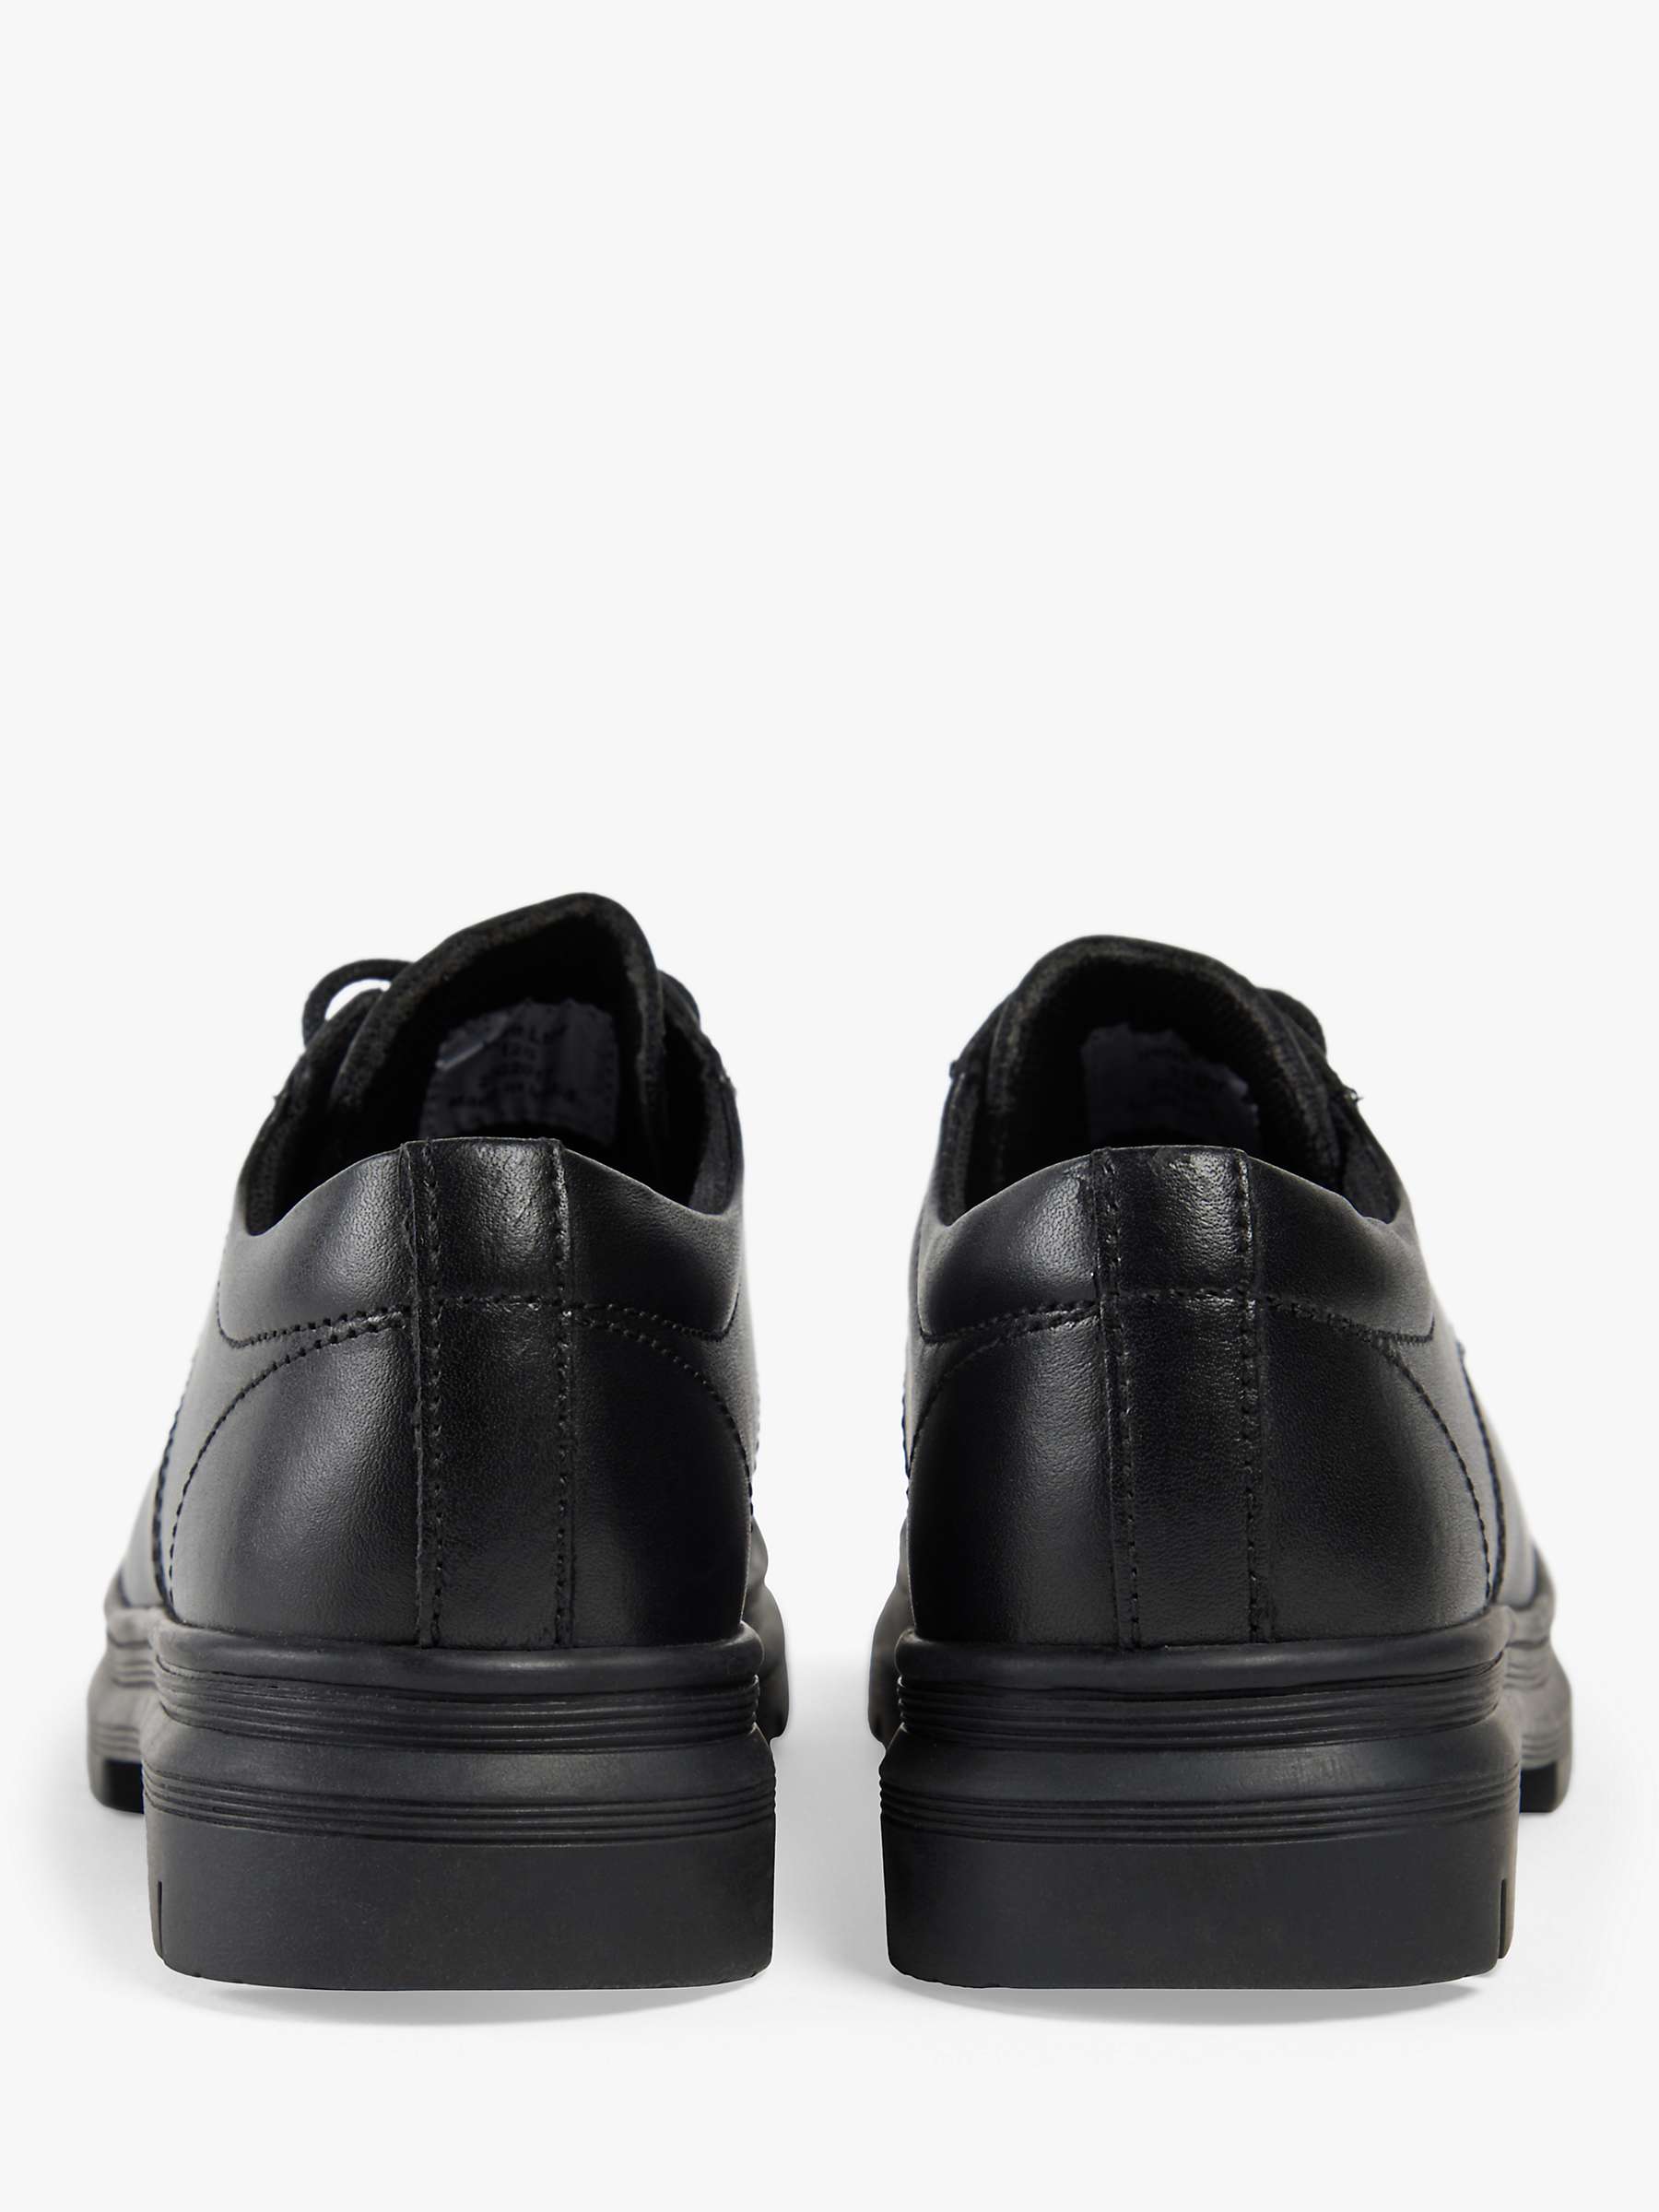 Buy Pod Kids' Irene Leather Lace Up Shoes, Black Online at johnlewis.com